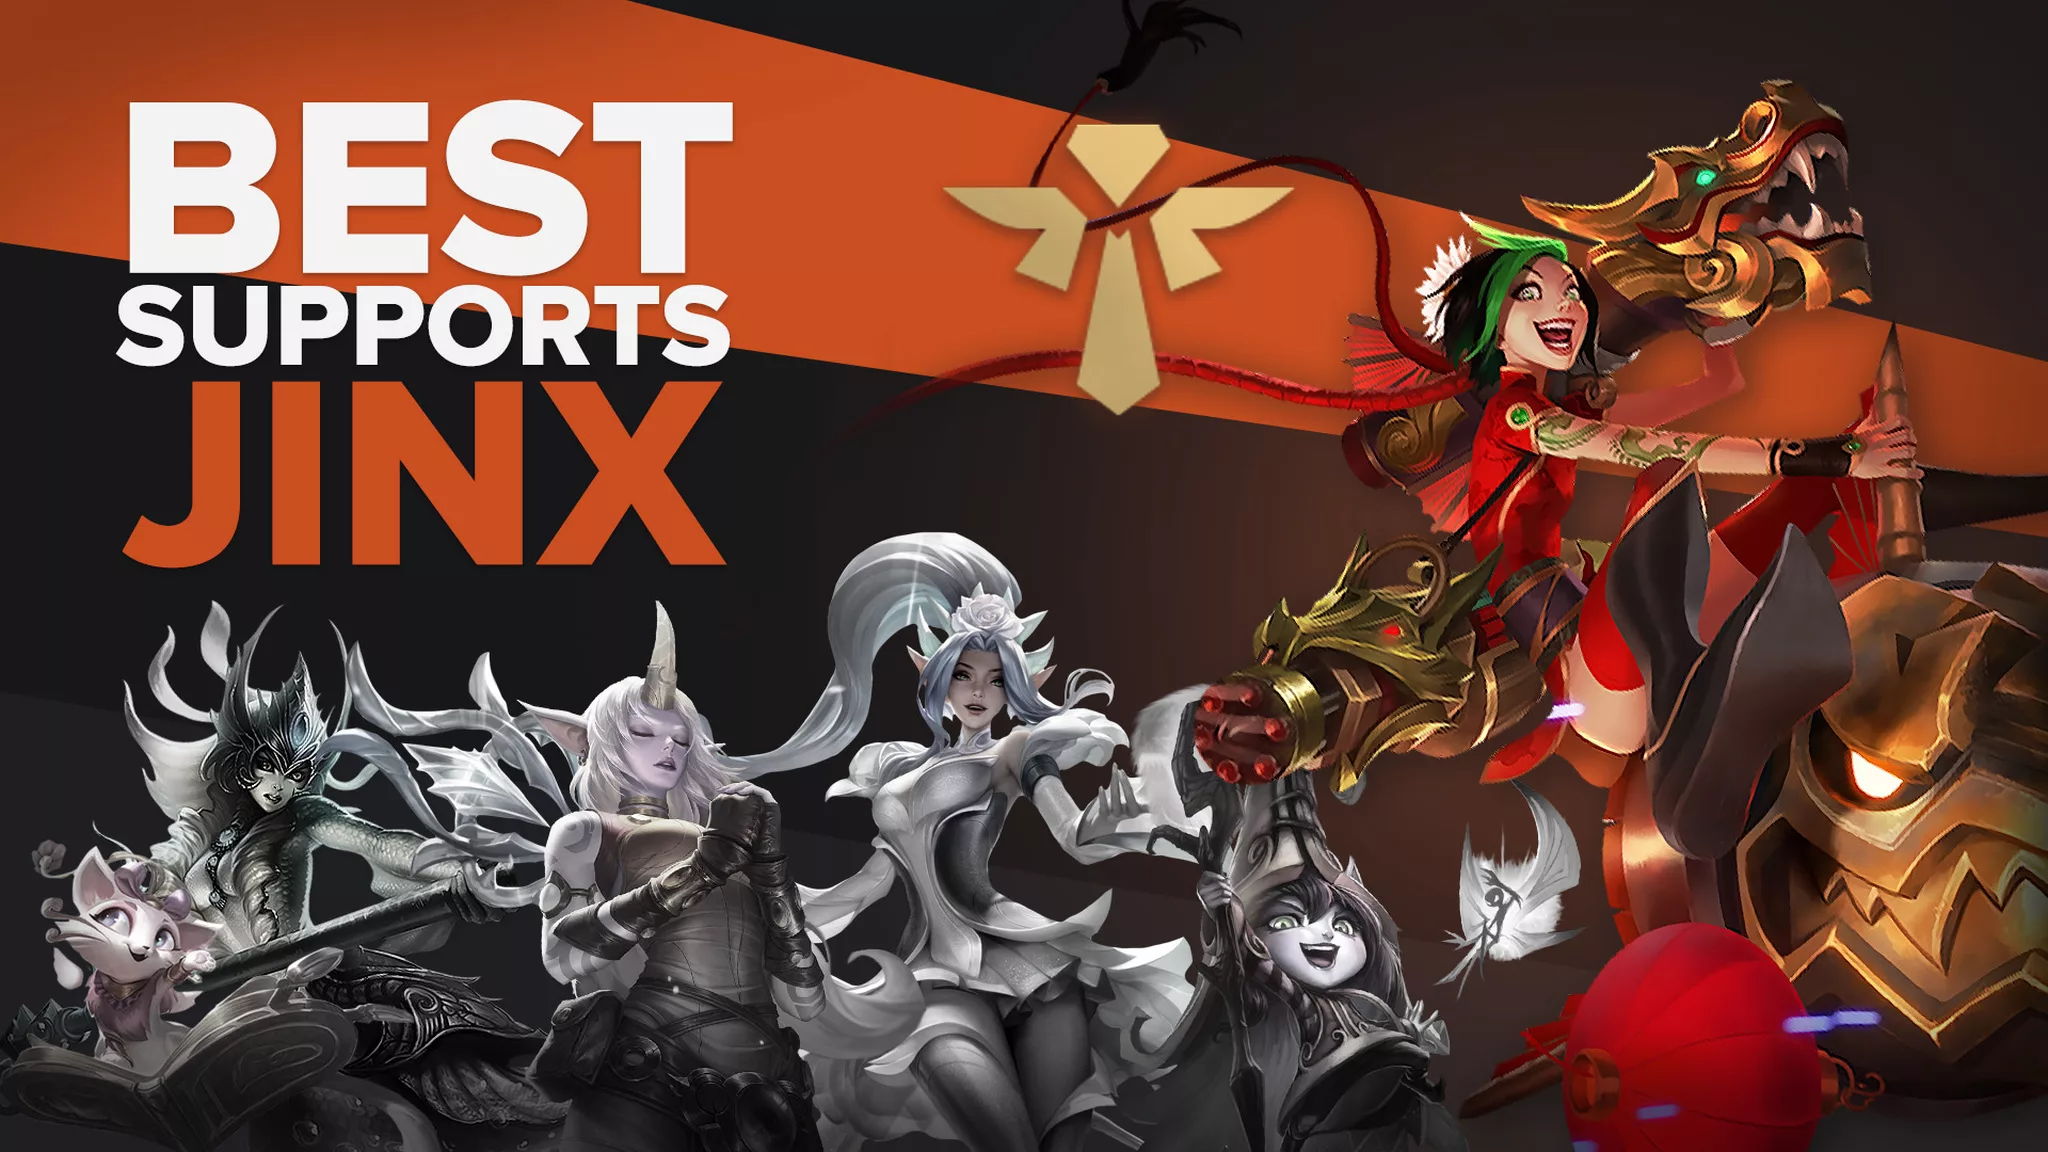 Best League of Legends Supports to Play With Jinx